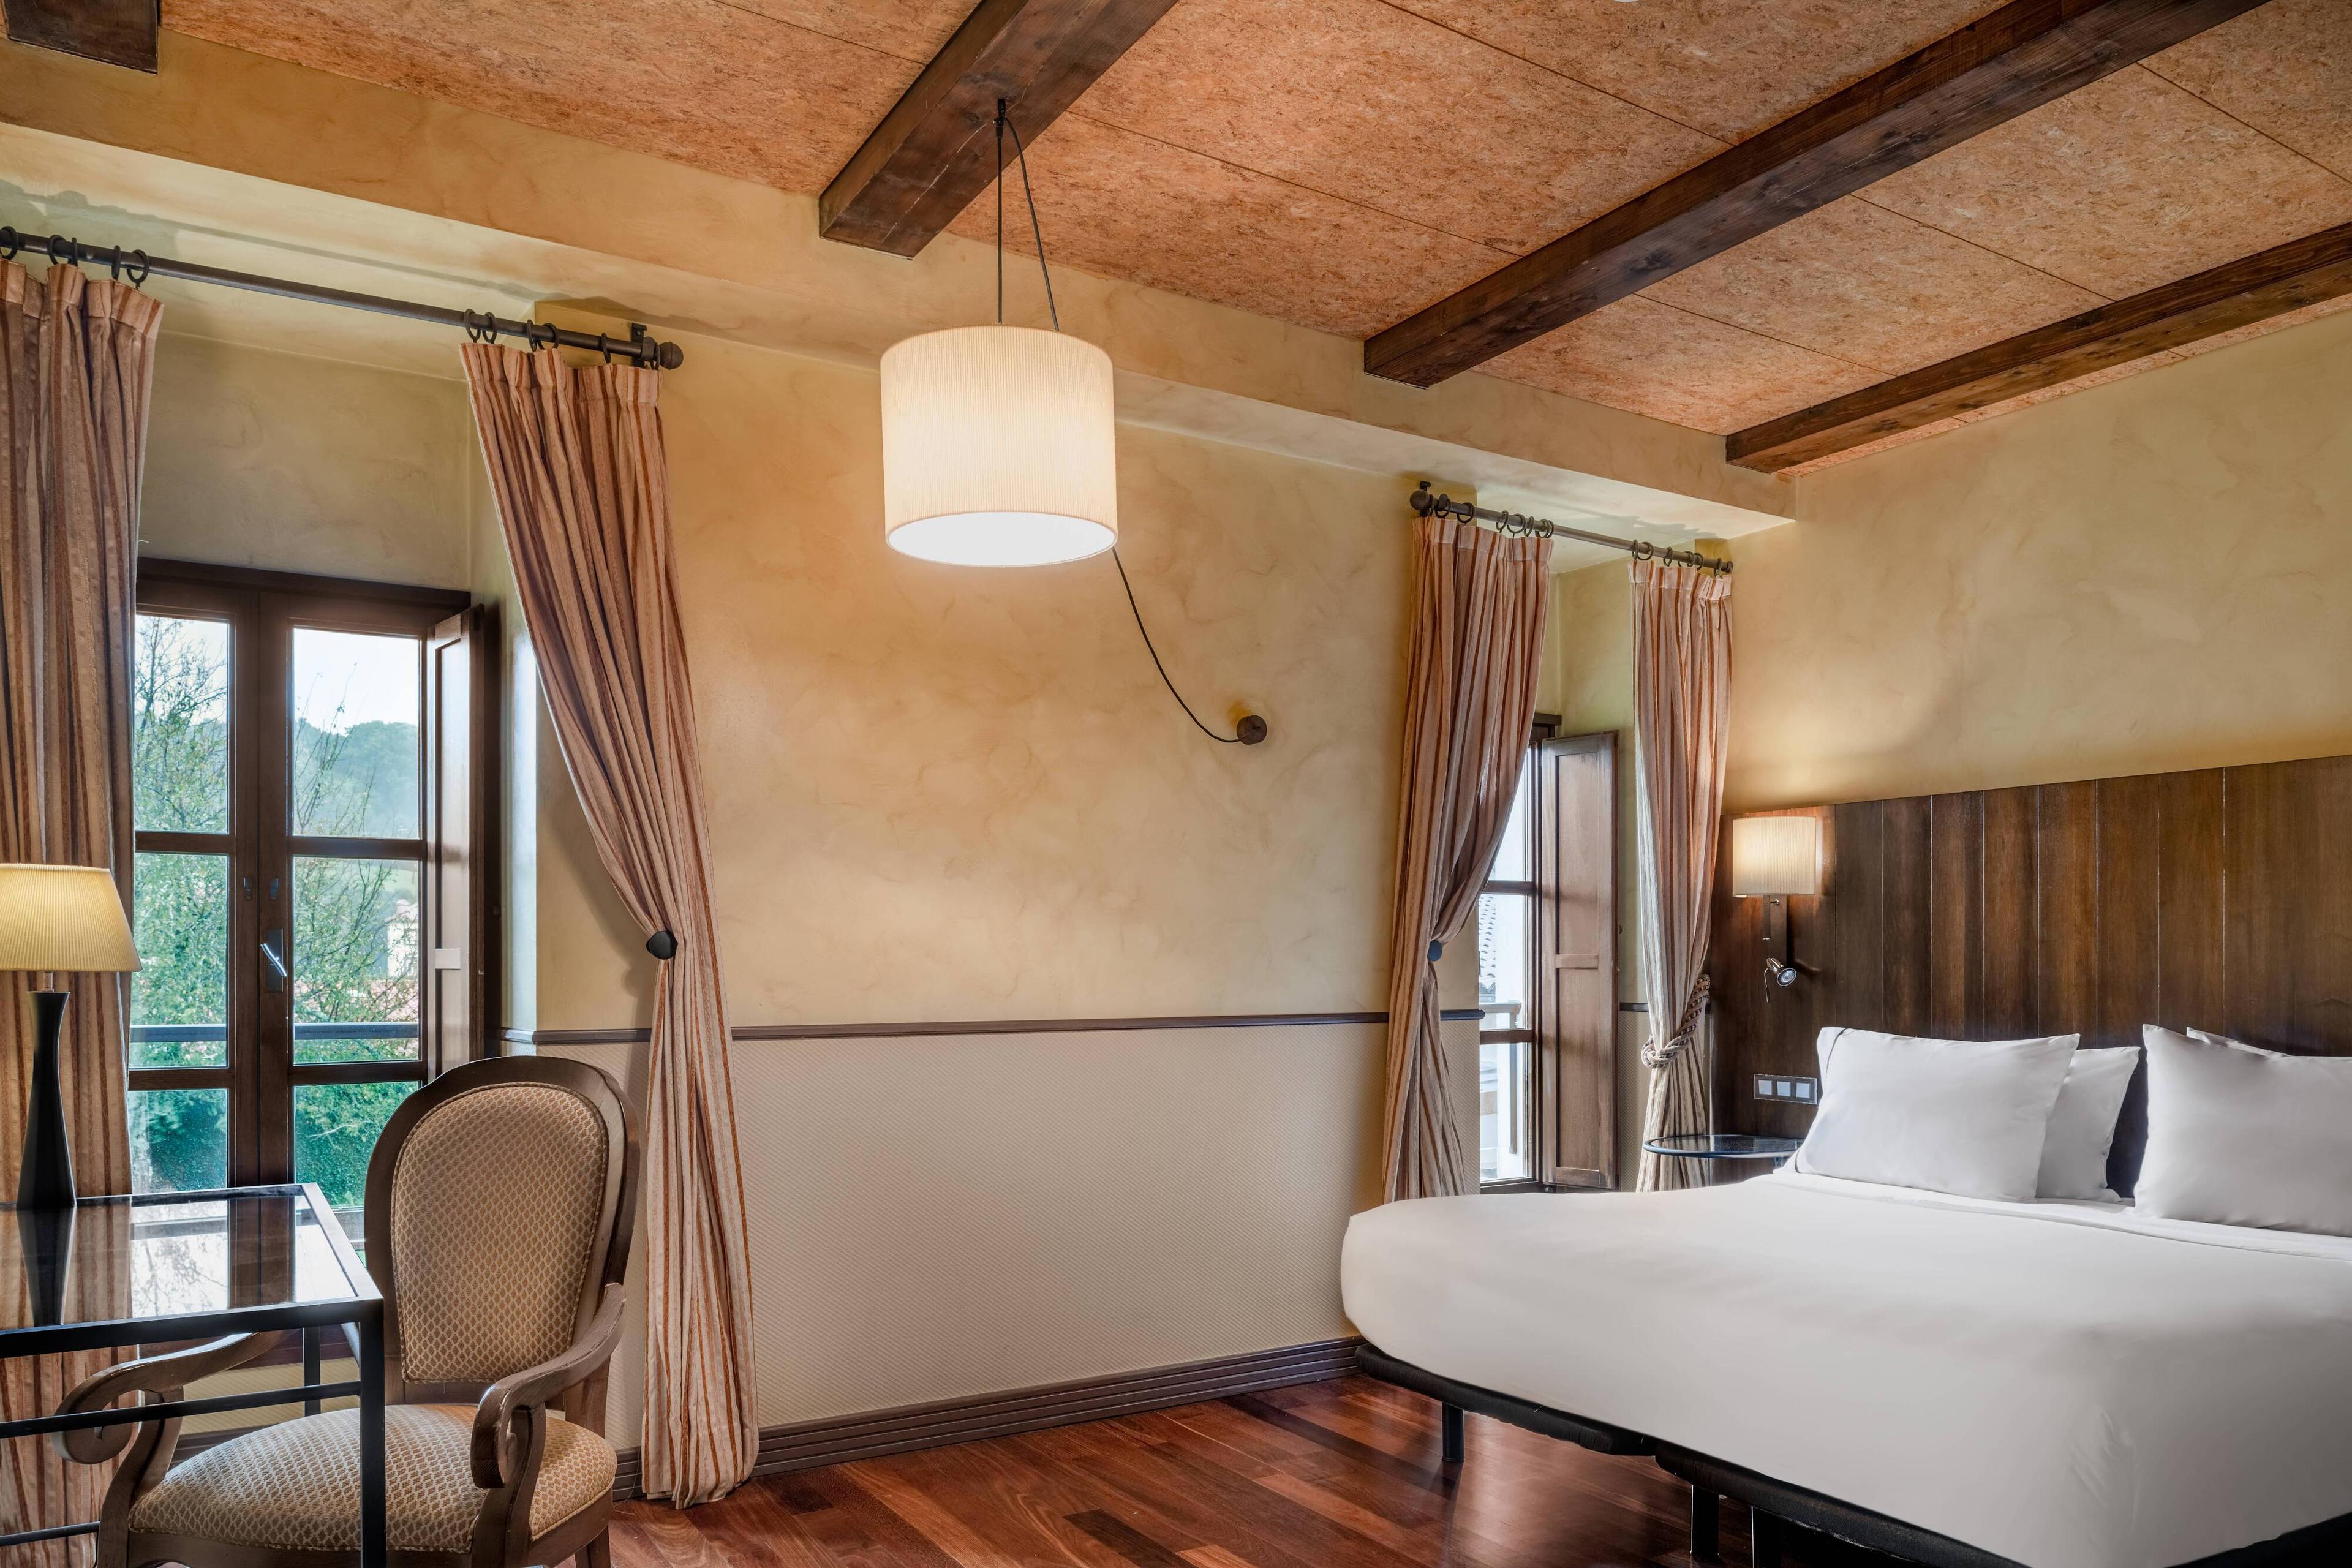 The King Deluxe Rooms of this former convent in Santiago de Compostela, feature a comfortable king size bed and several amenities and facilities to experience a prefect stay. All of them are decorated with the high quality furniture and with warm colors.